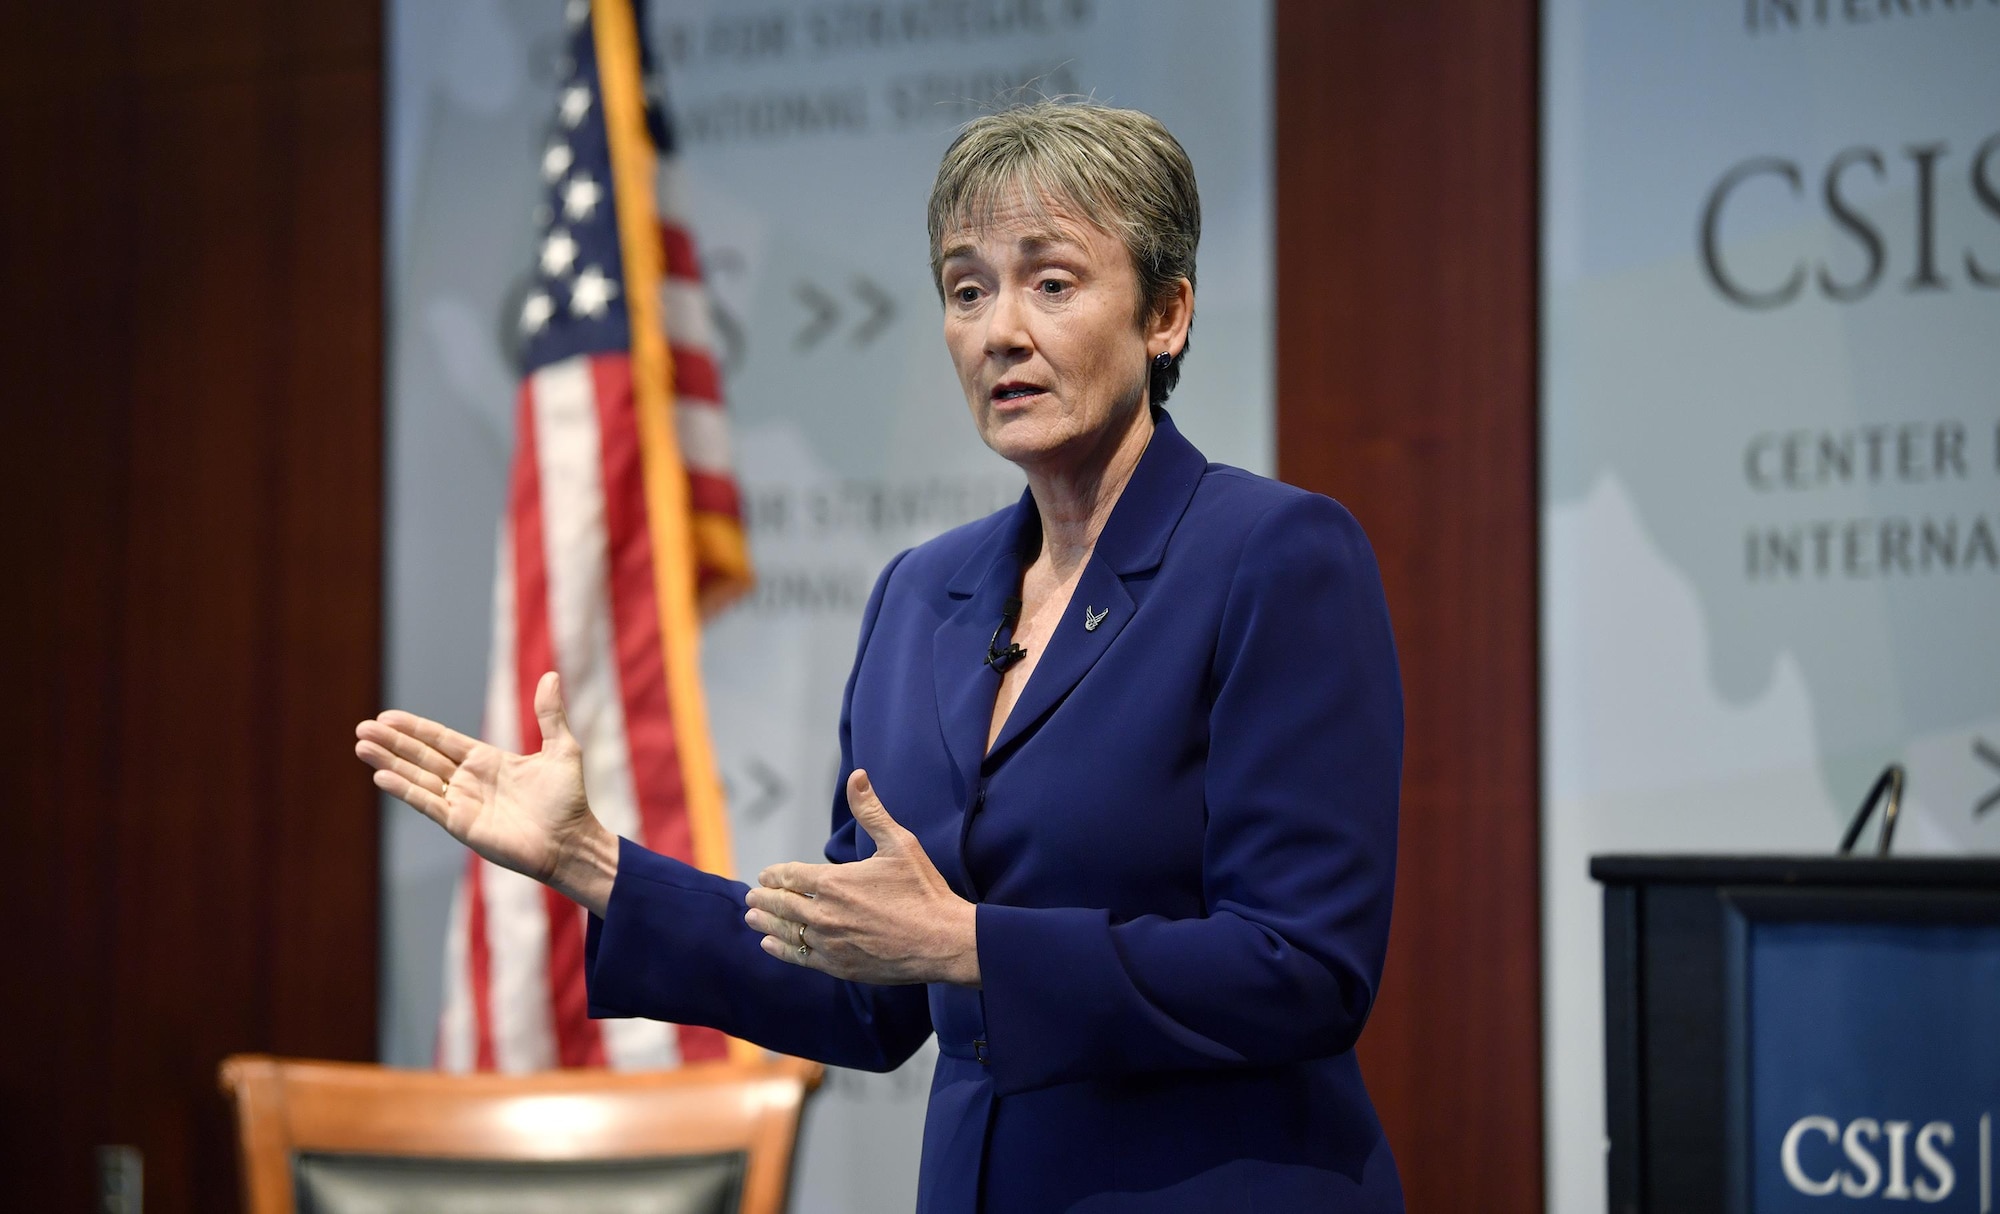 Secretary of the Air Force Heather Wilson speaks at the Center for Strategic & International Studies, Washington, D.C., October 5, 2017. Wilson highlighted the need to invest in our Airmen, readiness, modernization, and the future of Space operations. (U.S. Air Force photo by Wayne A. Clark)